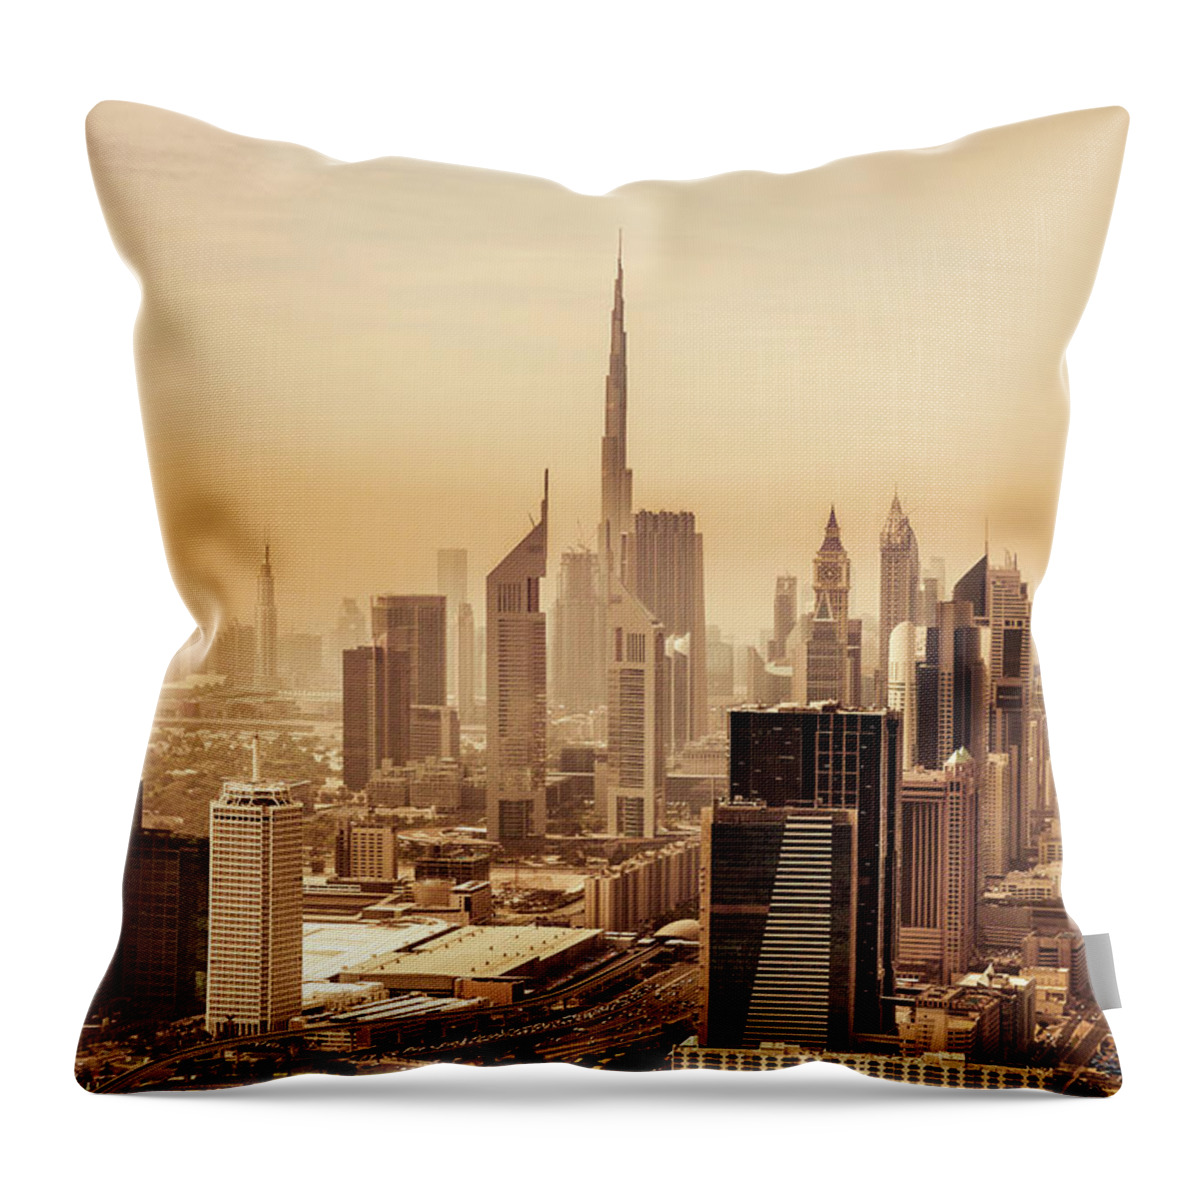 Arabia Throw Pillow featuring the photograph Dubai Downtown Skyscrapers And Office #1 by Leopatrizi